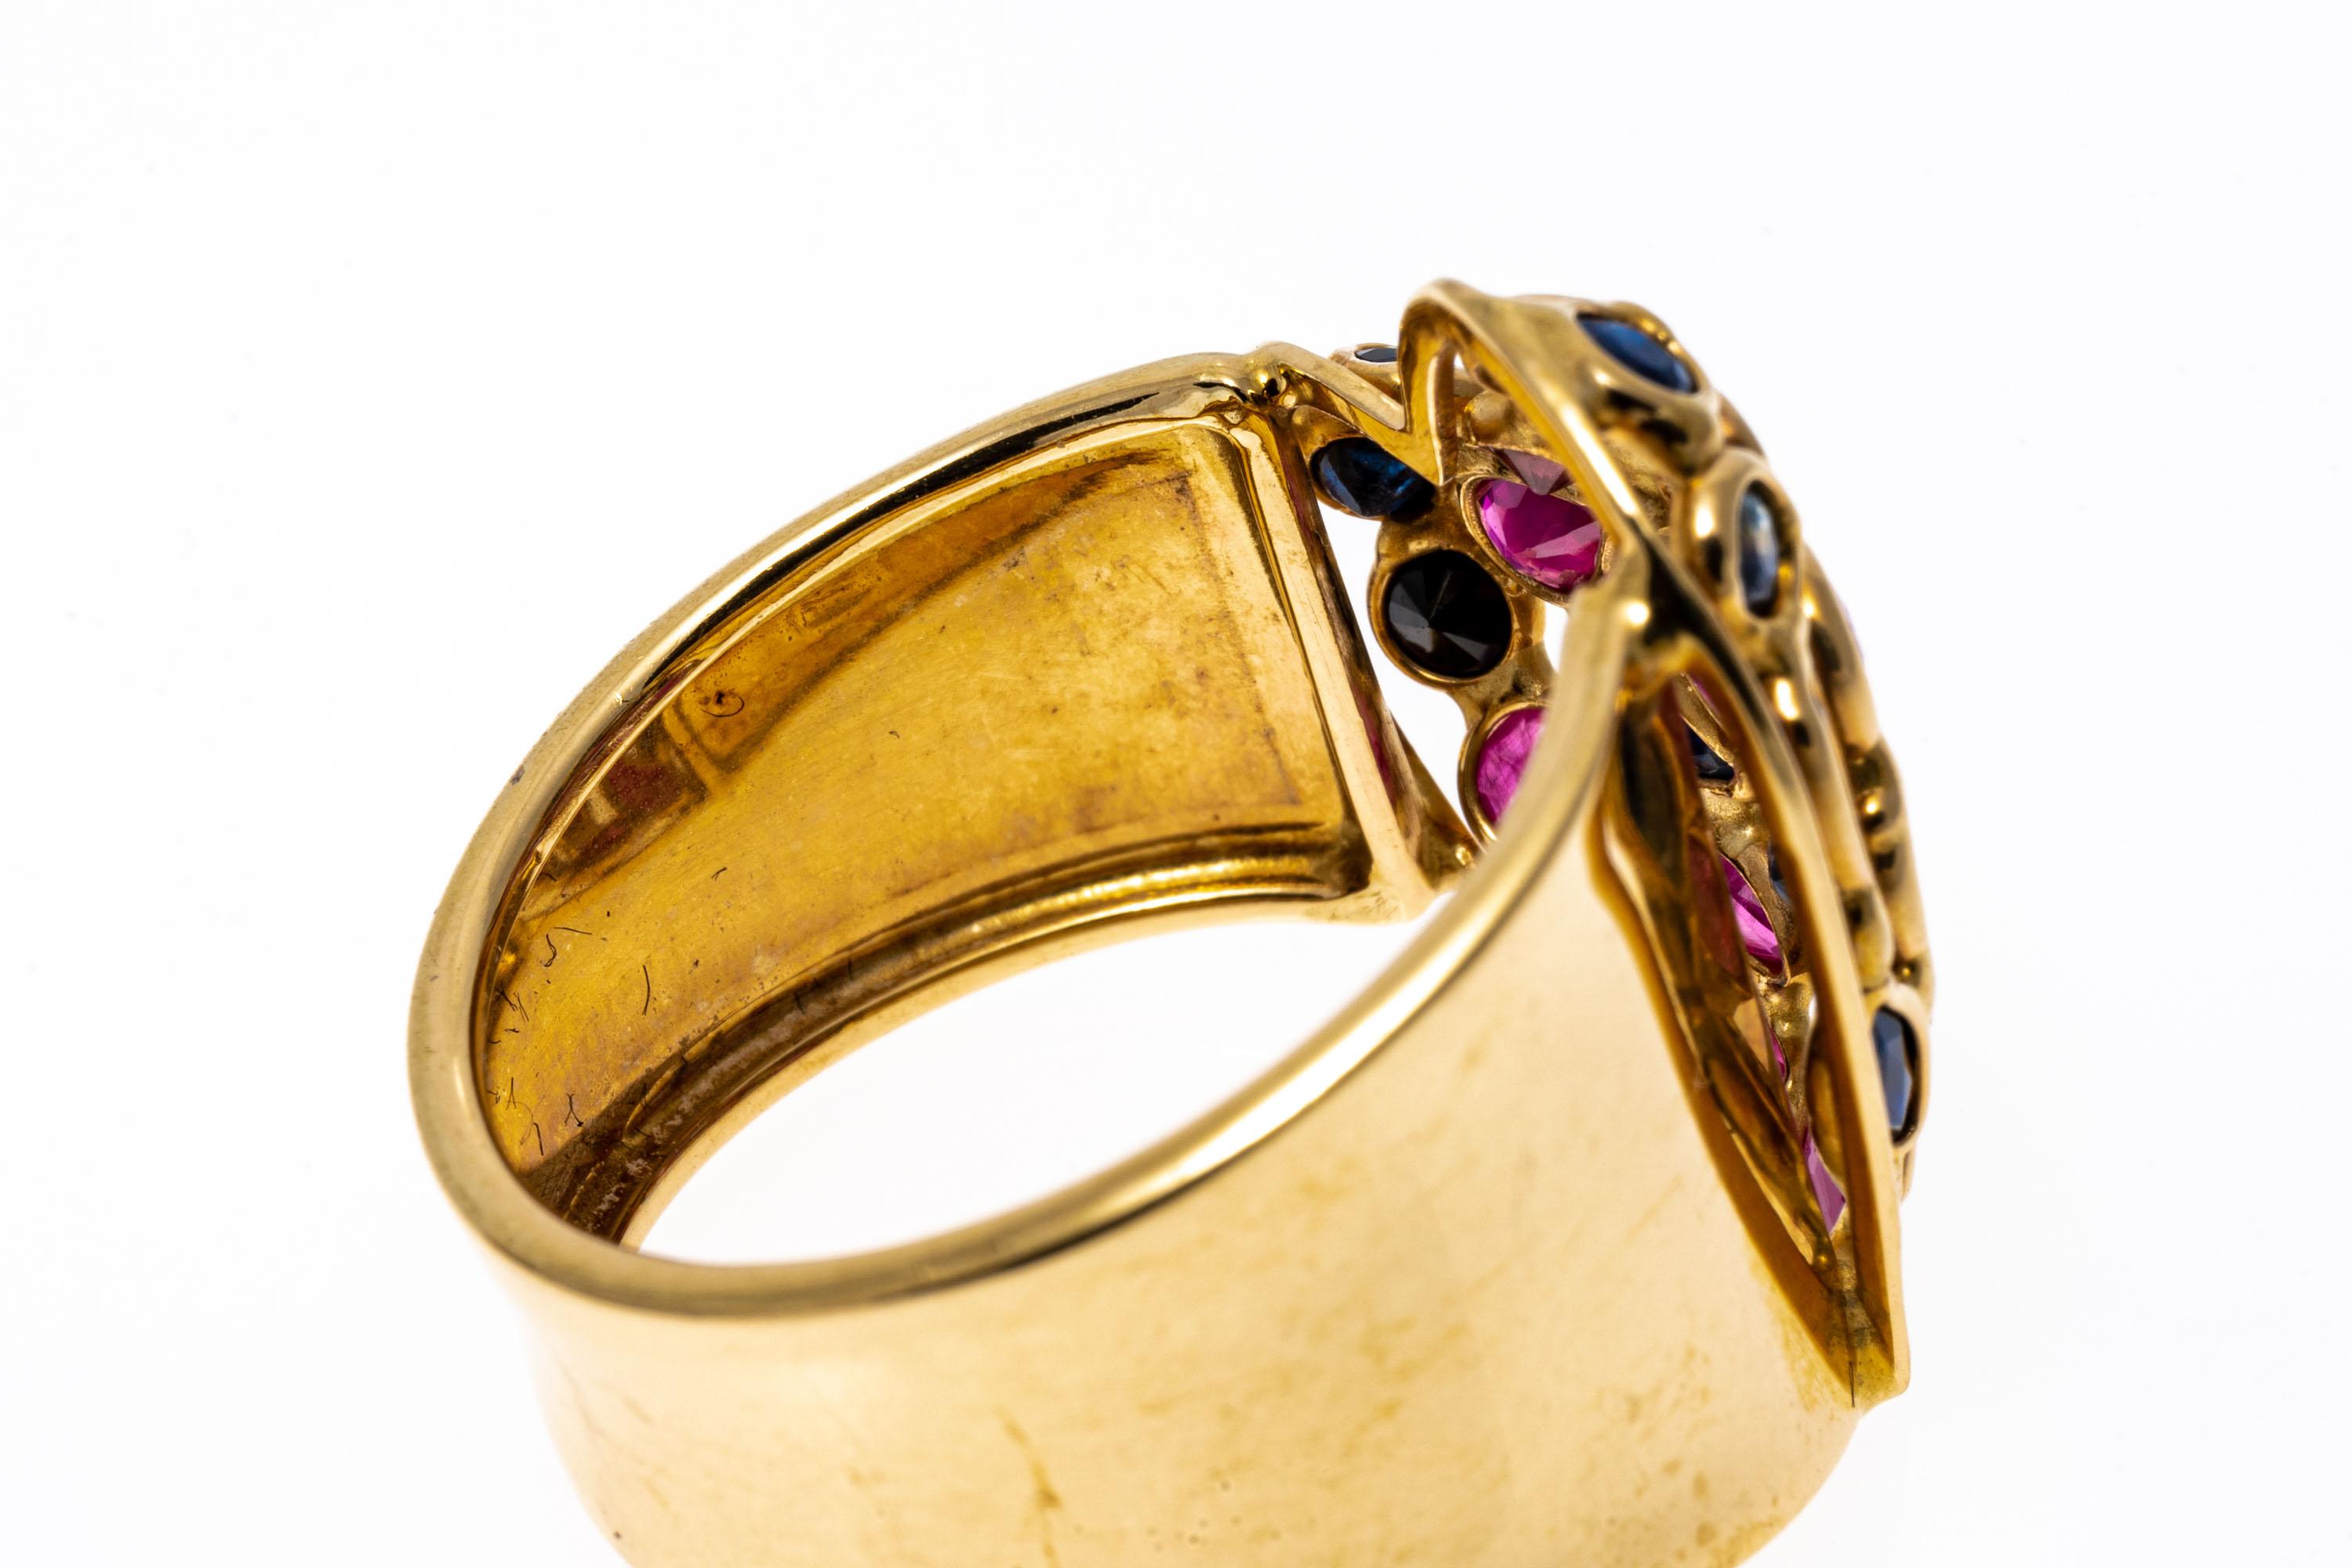 14k Wide Stained Glass Heart Motif Ring Set with Rubies and Sapphires In Good Condition For Sale In Southport, CT